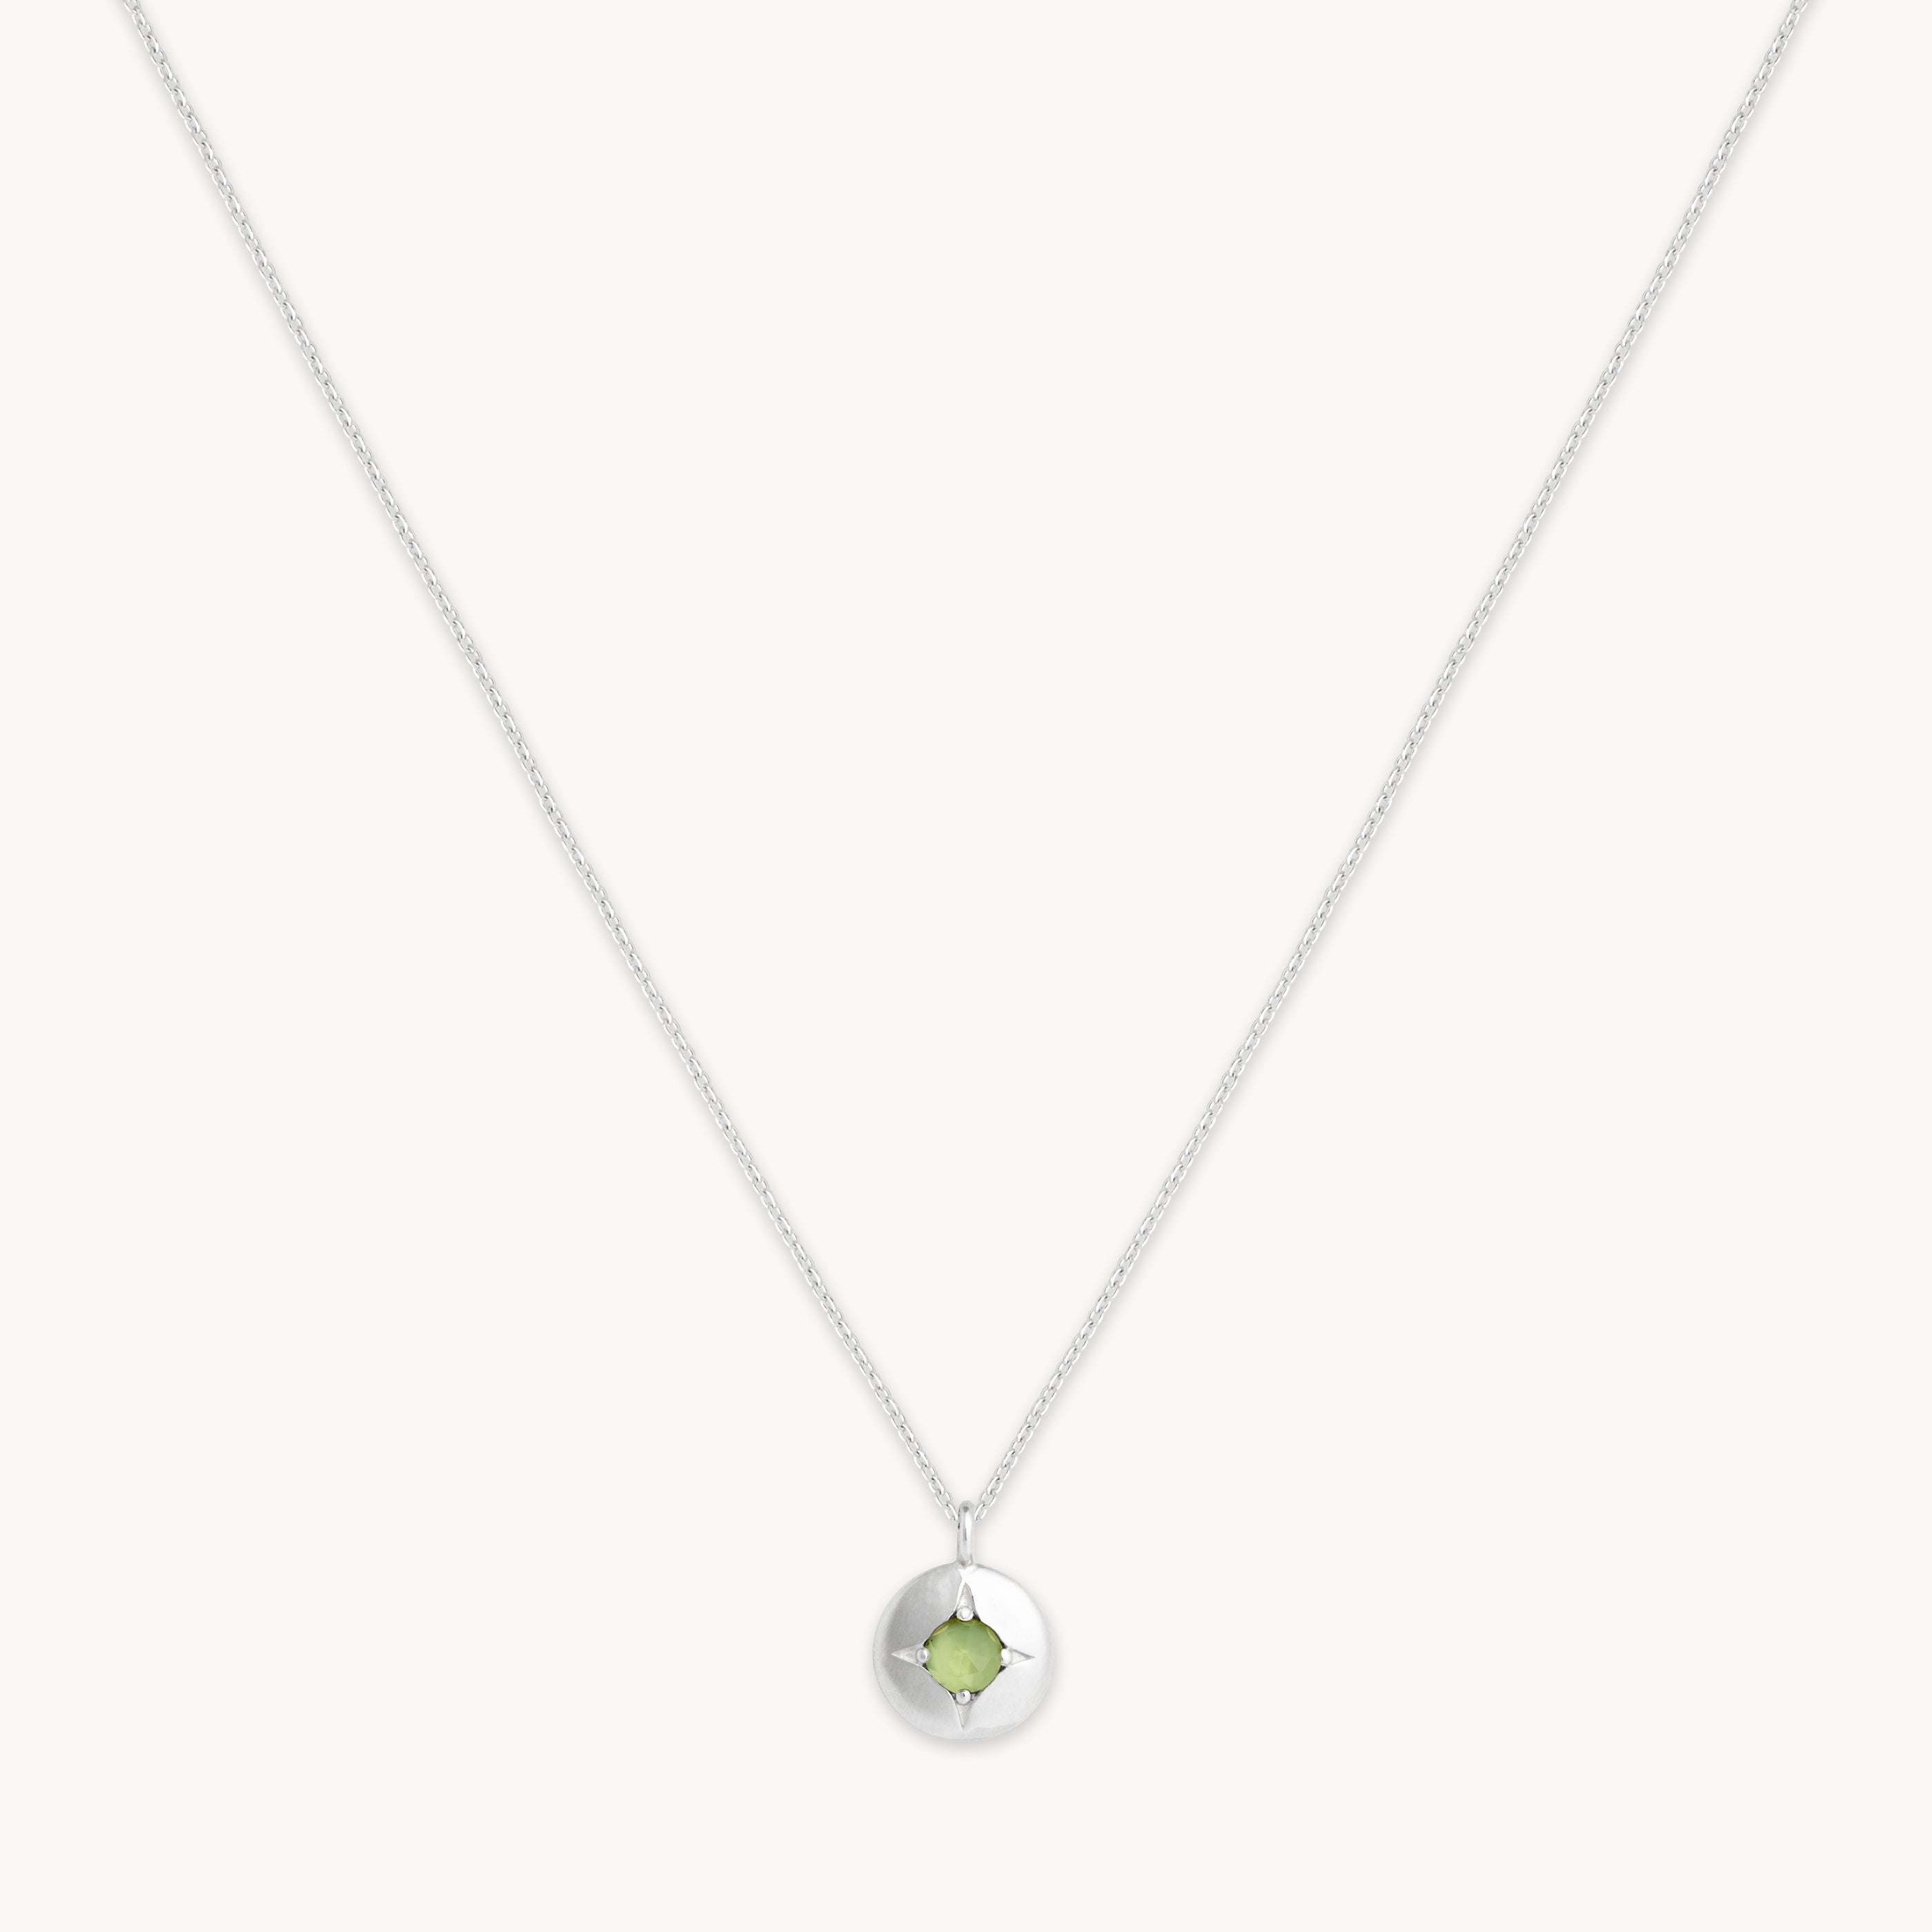 August Birthstone Necklace in Solid White Gold